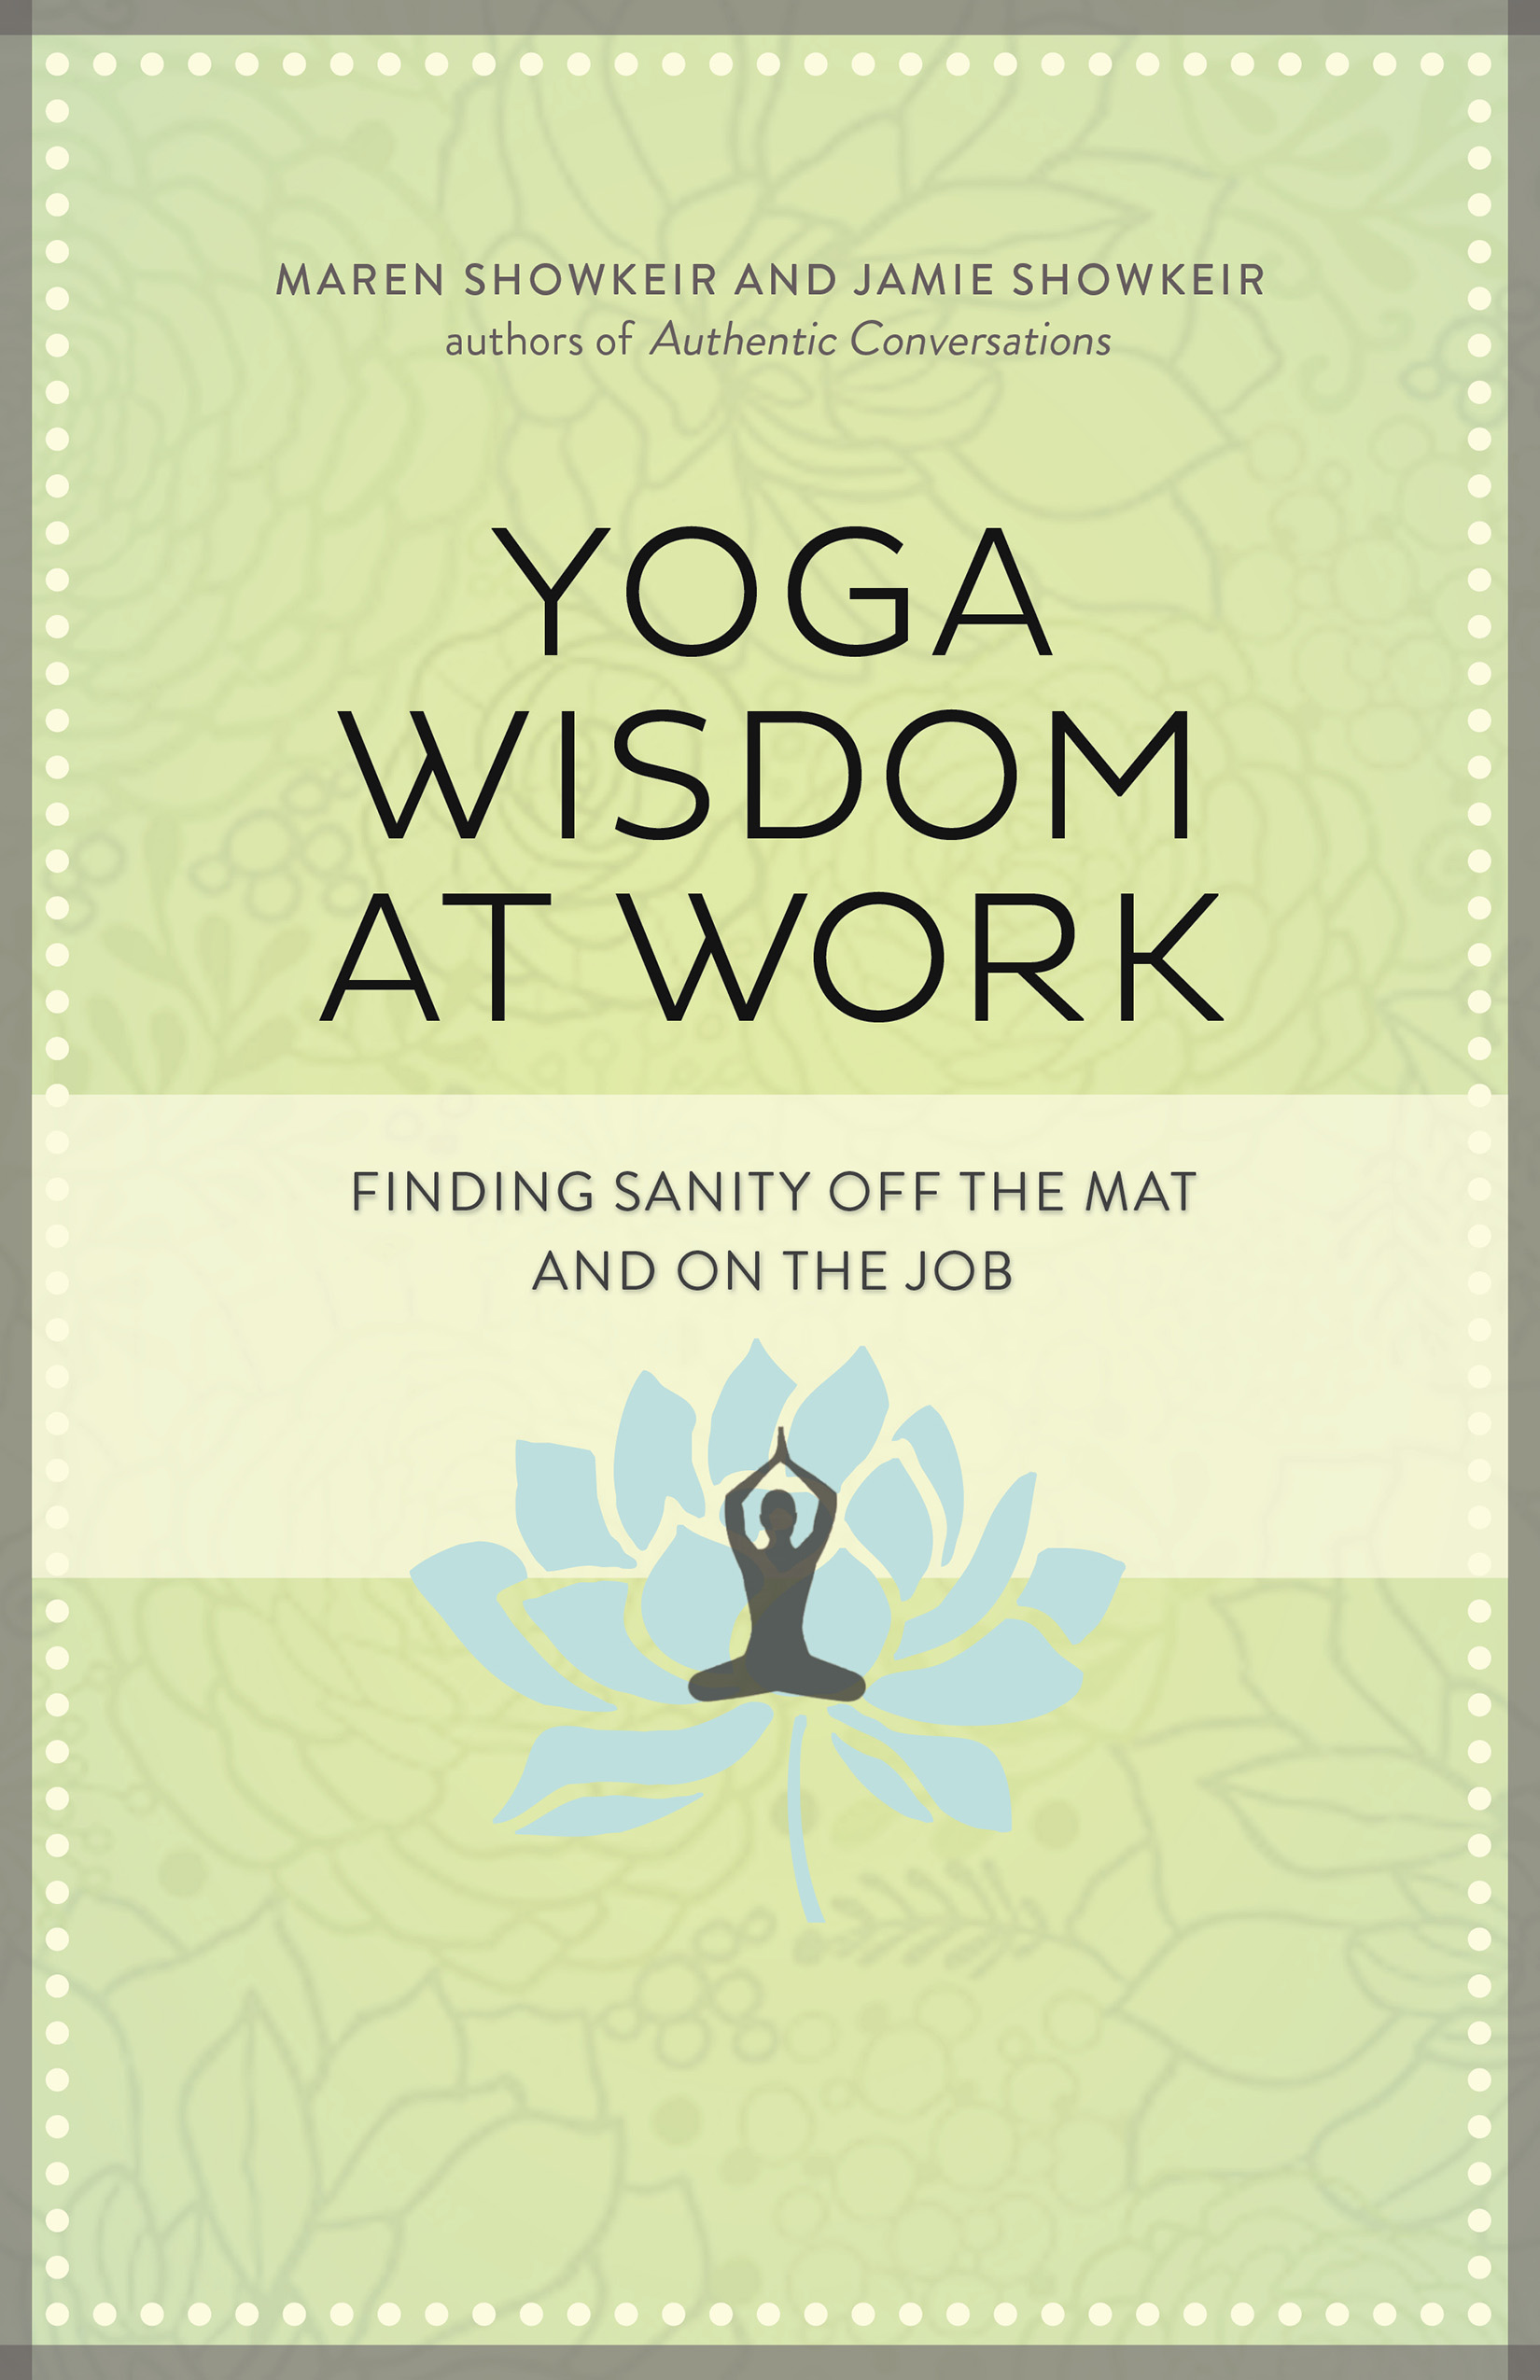 Yoga Wisdom at Work: Finding Sanity Off the Mat and On the Job.